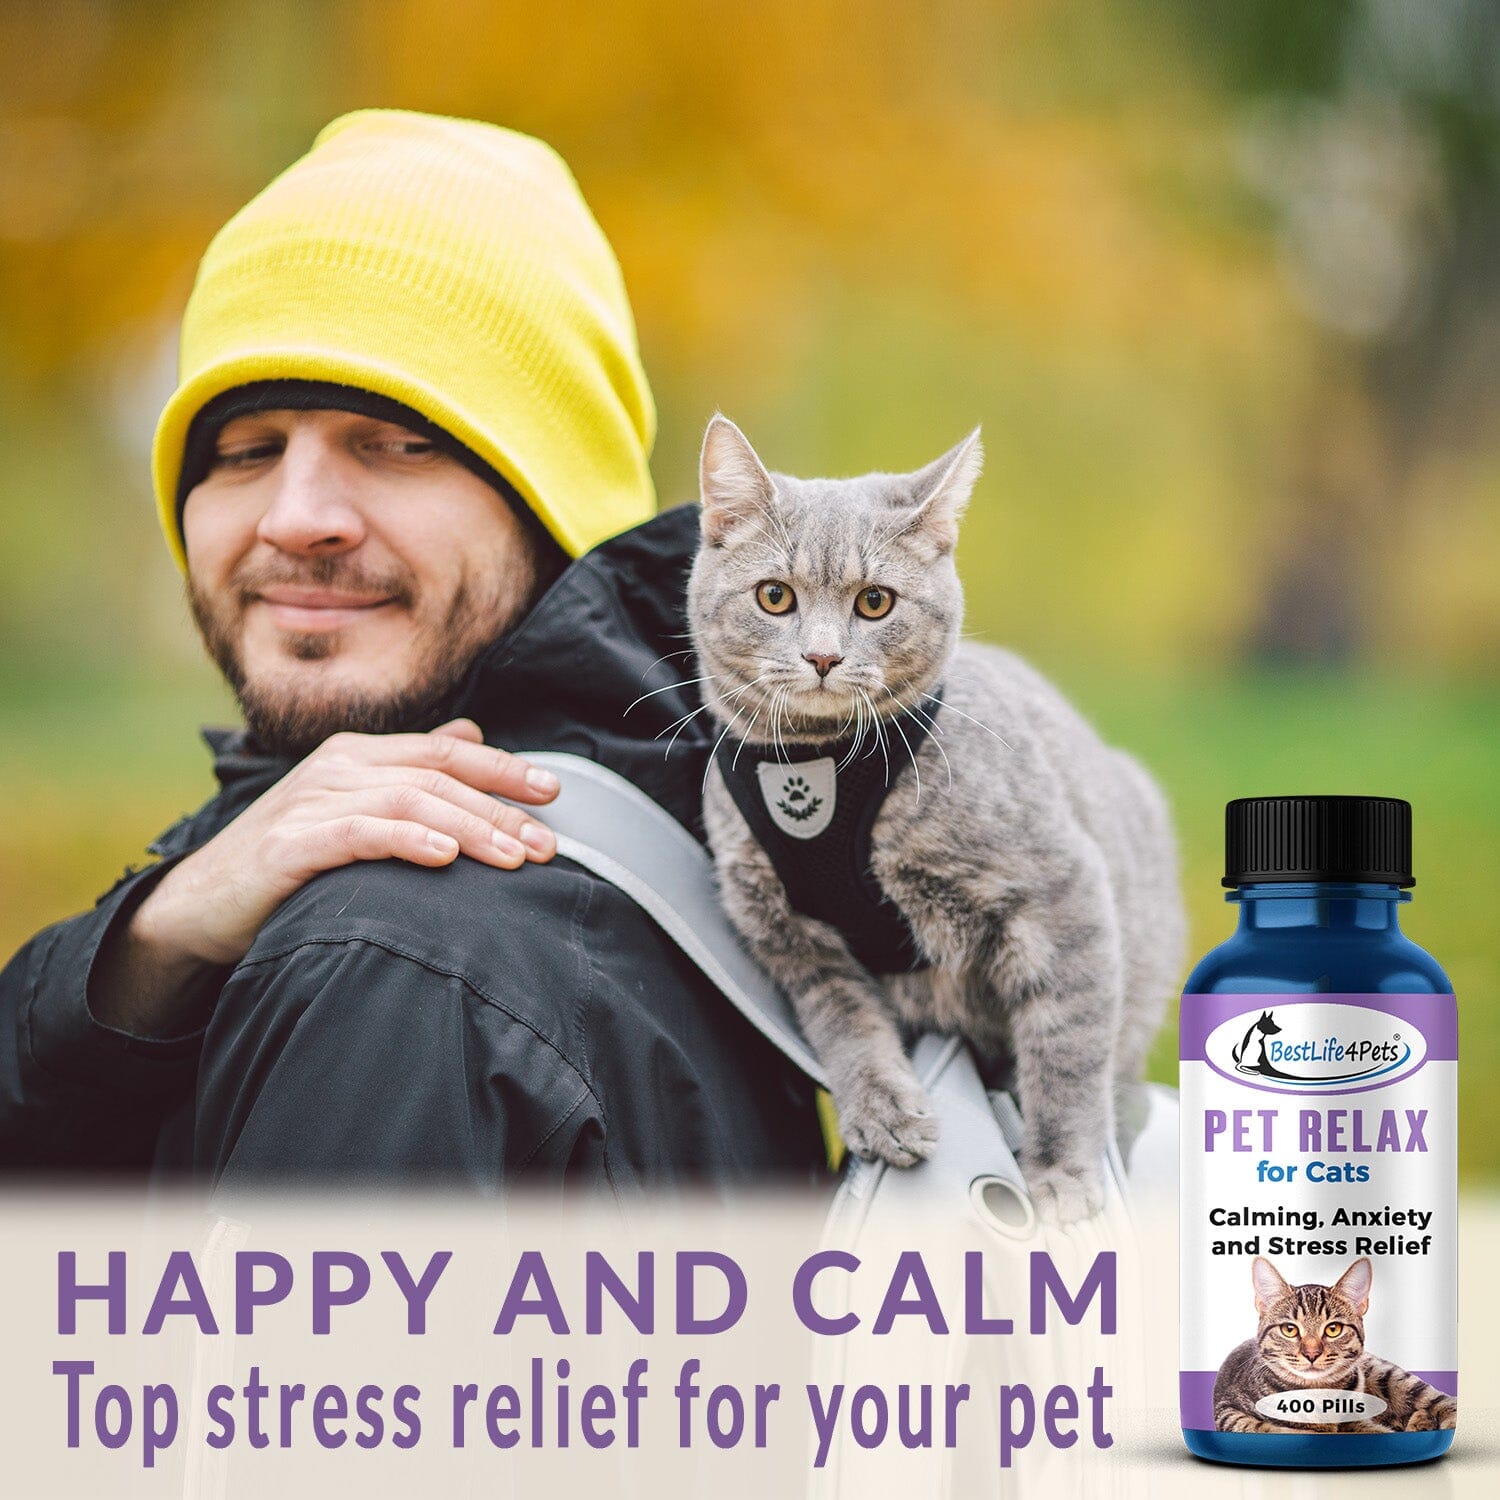 Cat Anxiety Medication, Calming Aids & More